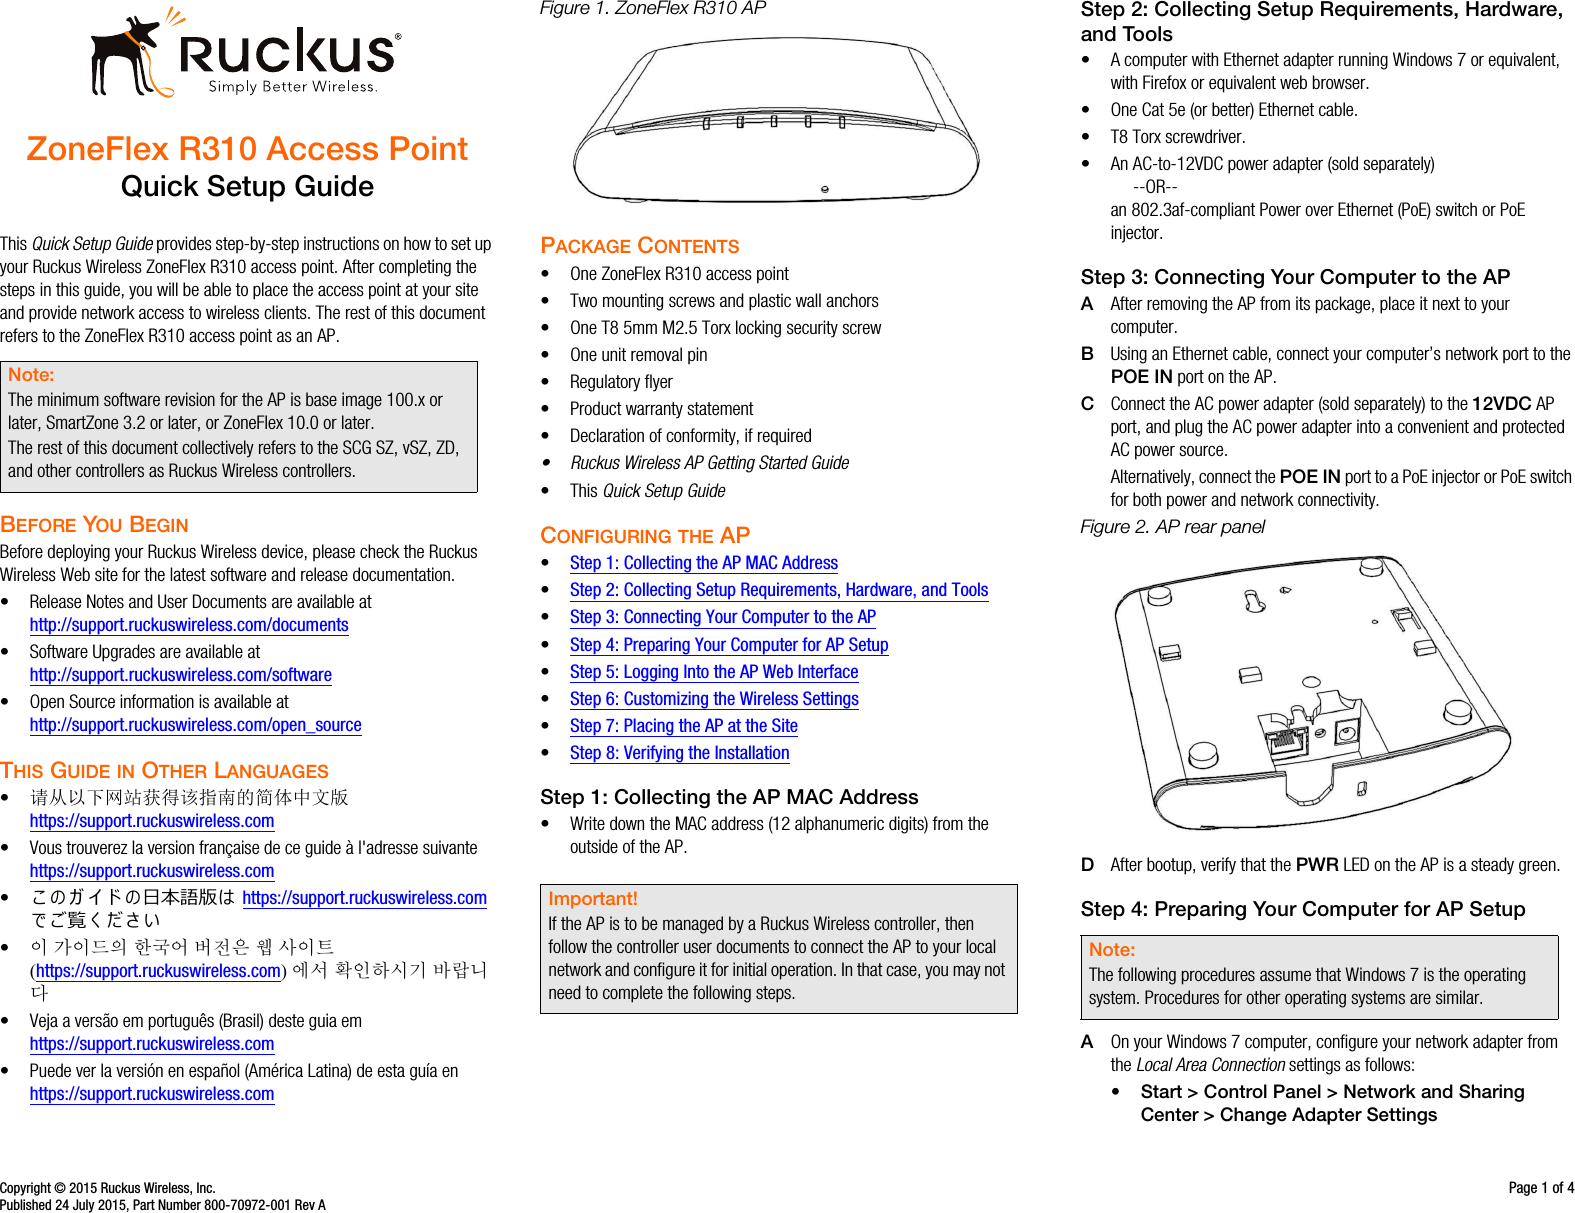 Copyright © 2015 Ruckus Wireless, Inc. Page 1 of 4Published 24 July 2015, Part Number 800-70972-001 Rev AZoneFlex R310 Access PointQuick Setup GuideThis Quick Setup Guide provides step-by-step instructions on how to set up your Ruckus Wireless ZoneFlex R310 access point. After completing the steps in this guide, you will be able to place the access point at your site and provide network access to wireless clients. The rest of this document refers to the ZoneFlex R310 access point as an AP.BEFORE YOU BEGINBefore deploying your Ruckus Wireless device, please check the Ruckus Wireless Web site for the latest software and release documentation.• Release Notes and User Documents are available at http://support.ruckuswireless.com/documents• Software Upgrades are available athttp://support.ruckuswireless.com/software• Open Source information is available athttp://support.ruckuswireless.com/open_sourceTHIS GUIDE IN OTHER LANGUAGES•请从以下网站获得该指南的简体中文版 https://support.ruckuswireless.com• Vous trouverez la version française de ce guide à l&apos;adresse suivante https://support.ruckuswireless.com•󴎾 󴏙 ガ イ ド 󴏙日本語版󴏚 https://support.ruckuswireless.com で󴎿覧く だ󴏀い•이 가이드의 한국어 버전은 웹 사이트(https://support.ruckuswireless.com)에서 확인하시기 바랍니다• Veja a versão em português (Brasil) deste guia em https://support.ruckuswireless.com• Puede ver la versión en español (América Latina) de esta guía en https://support.ruckuswireless.comFigure 1. ZoneFlex R310 APPACKAGE CONTENTS• One ZoneFlex R310 access point• Two mounting screws and plastic wall anchors• One T8 5mm M2.5 Torx locking security screw• One unit removal pin• Regulatory flyer• Product warranty statement• Declaration of conformity, if required• Ruckus Wireless AP Getting Started Guide •This Quick Setup GuideCONFIGURING THE AP•Step 1: Collecting the AP MAC Address•Step 2: Collecting Setup Requirements, Hardware, and Tools•Step 3: Connecting Your Computer to the AP•Step 4: Preparing Your Computer for AP Setup•Step 5: Logging Into the AP Web Interface•Step 6: Customizing the Wireless Settings•Step 7: Placing the AP at the Site•Step 8: Verifying the InstallationStep 1: Collecting the AP MAC Address• Write down the MAC address (12 alphanumeric digits) from the outside of the AP.Step 2: Collecting Setup Requirements, Hardware, and Tools • A computer with Ethernet adapter running Windows 7 or equivalent, with Firefox or equivalent web browser.• One Cat 5e (or better) Ethernet cable.• T8 Torx screwdriver.• An AC-to-12VDC power adapter (sold separately)--OR--an 802.3af-compliant Power over Ethernet (PoE) switch or PoE injector.Step 3: Connecting Your Computer to the APAAfter removing the AP from its package, place it next to your computer.BUsing an Ethernet cable, connect your computer’s network port to the POE IN port on the AP. CConnect the AC power adapter (sold separately) to the 12VDC AP port, and plug the AC power adapter into a convenient and protected AC power source. Alternatively, connect the POE IN port to a PoE injector or PoE switch for both power and network connectivity.Figure 2. AP rear panelDAfter bootup, verify that the PWR LED on the AP is a steady green.Step 4: Preparing Your Computer for AP SetupAOn your Windows 7 computer, configure your network adapter from the Local Area Connection settings as follows:• Start &gt; Control Panel &gt; Network and Sharing Center &gt; Change Adapter SettingsNote:The minimum software revision for the AP is base image 100.x or later, SmartZone 3.2 or later, or ZoneFlex 10.0 or later. The rest of this document collectively refers to the SCG SZ, vSZ, ZD, and other controllers as Ruckus Wireless controllers. Important!If the AP is to be managed by a Ruckus Wireless controller, then follow the controller user documents to connect the AP to your local network and configure it for initial operation. In that case, you may not need to complete the following steps.Note:The following procedures assume that Windows 7 is the operating system. Procedures for other operating systems are similar.